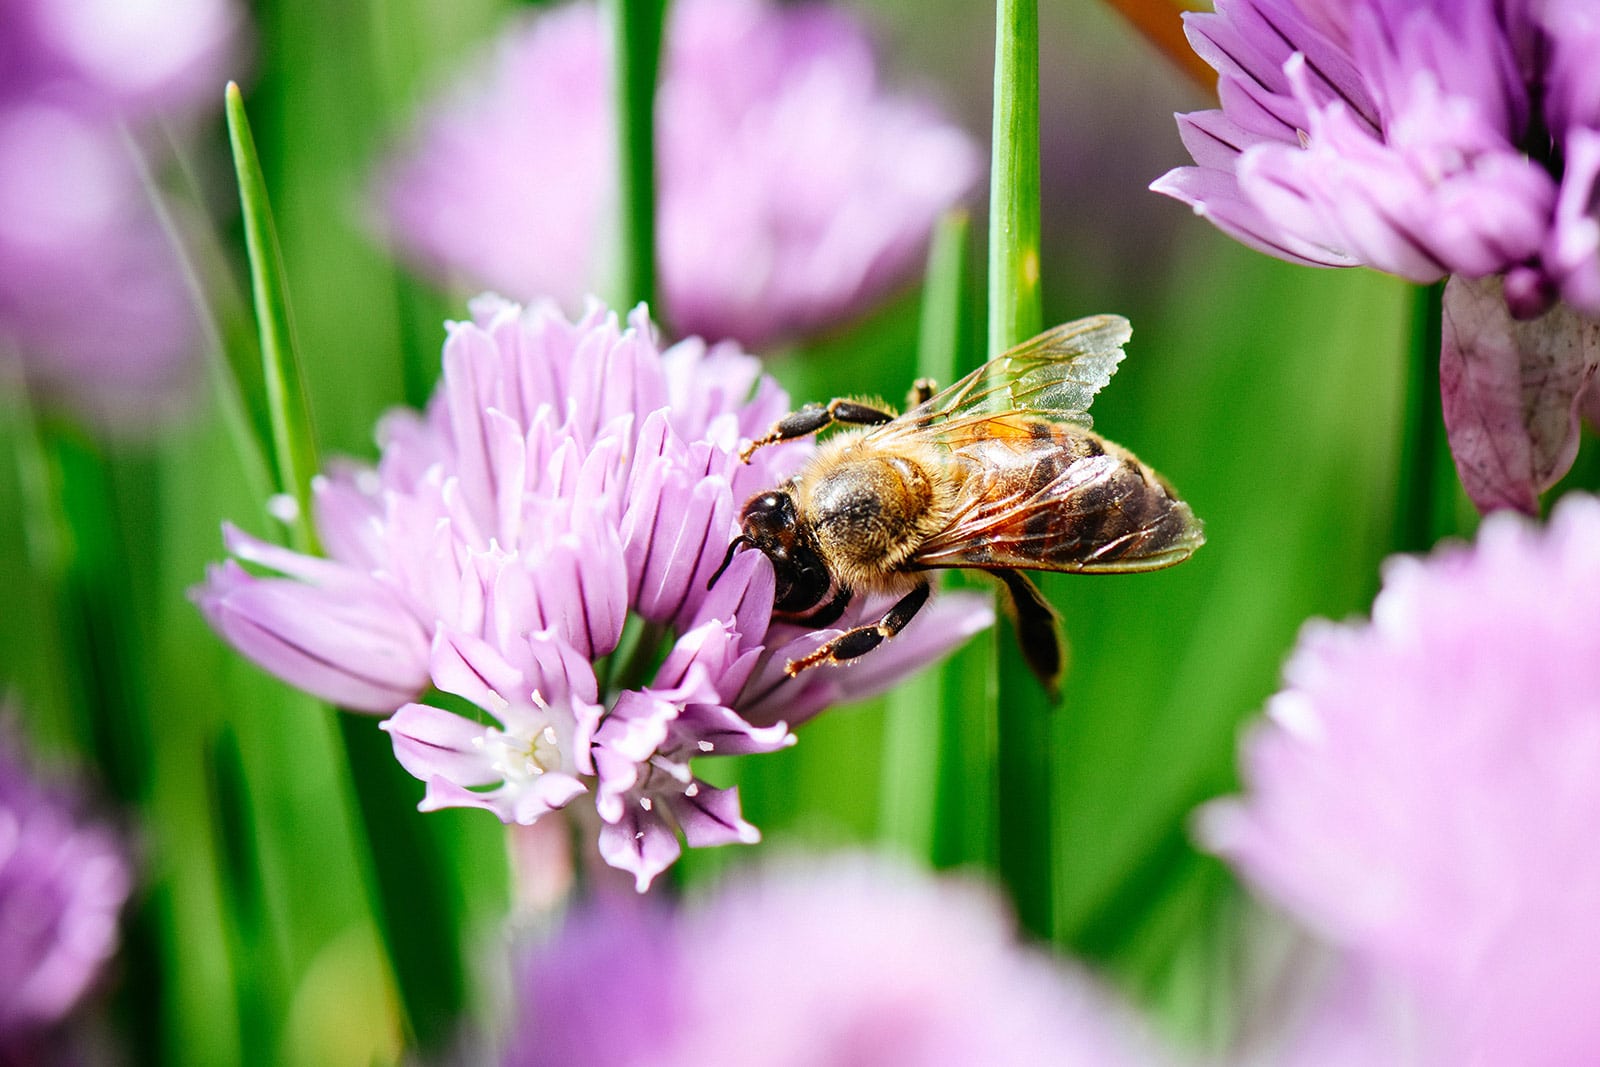 Honeybee perched on a purple chive blossom